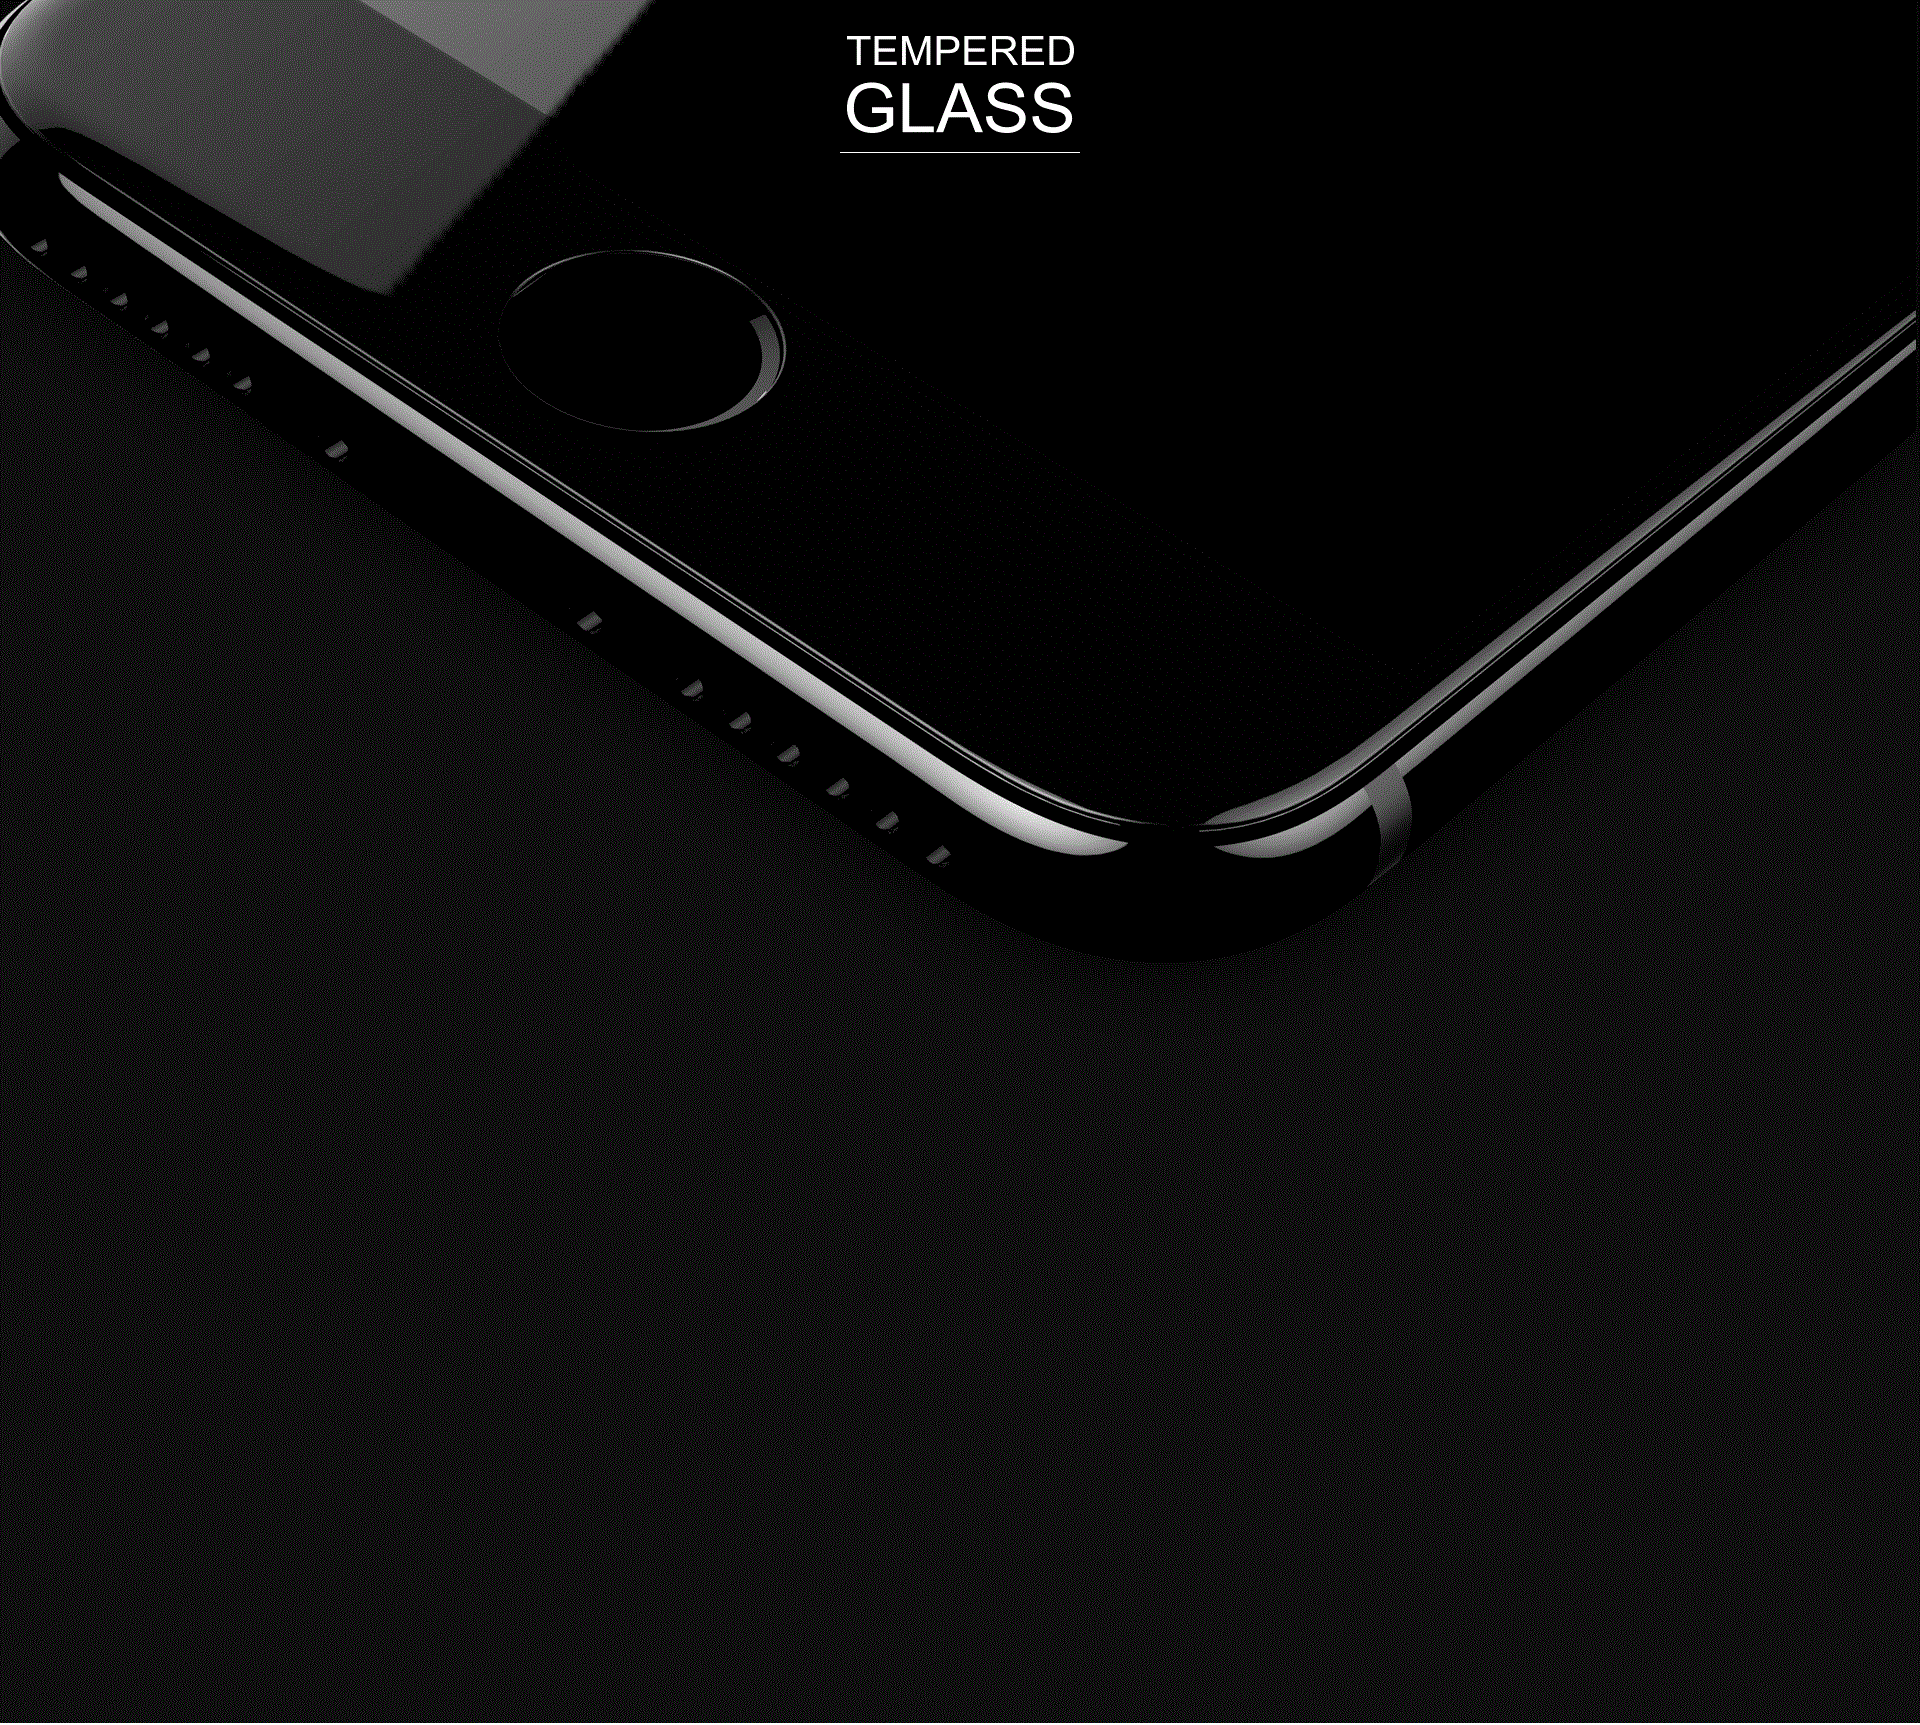 REMAX Official Store -Tempered Glass Ceaser 3D Full Cover iPhone 6/7/Plus